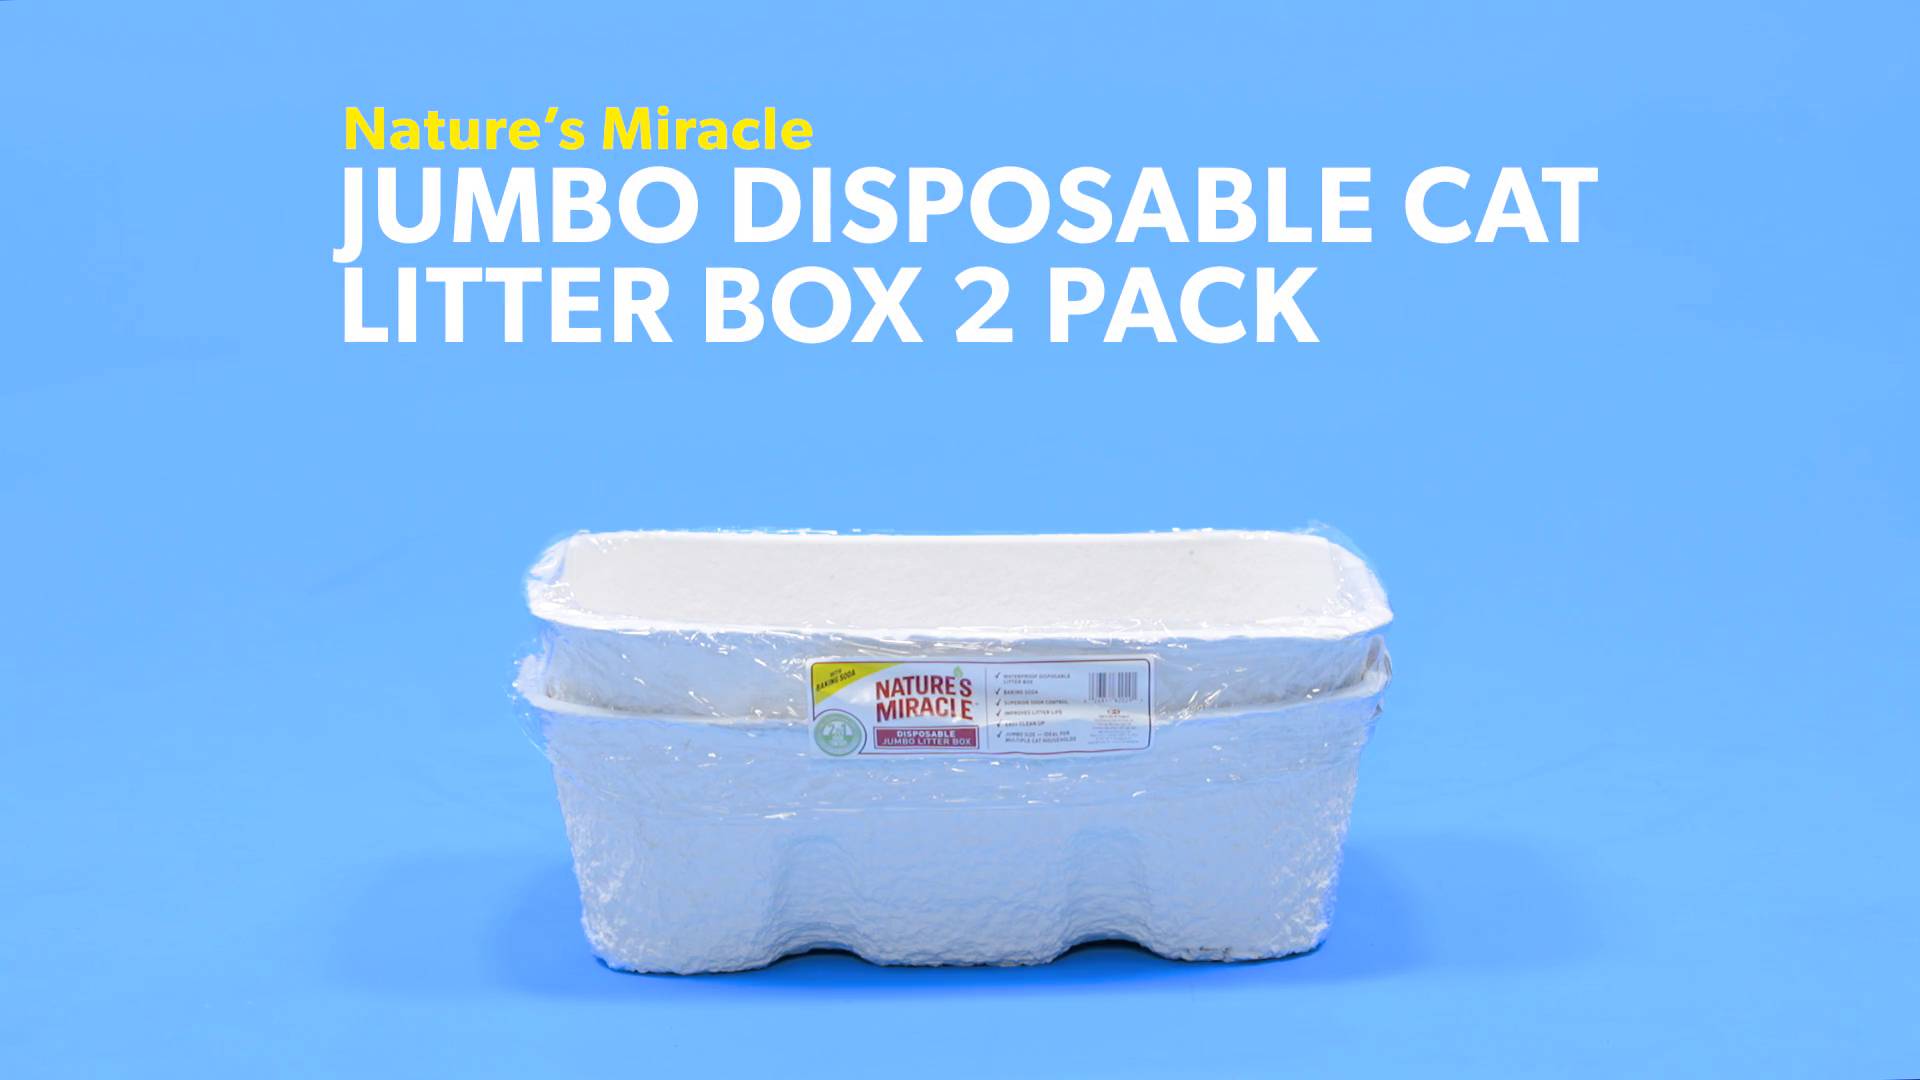 Jumbo 2Pack Natures Miracle Disposable Litter Box,Will not shred or leak ecycled paper and land-fill safe 